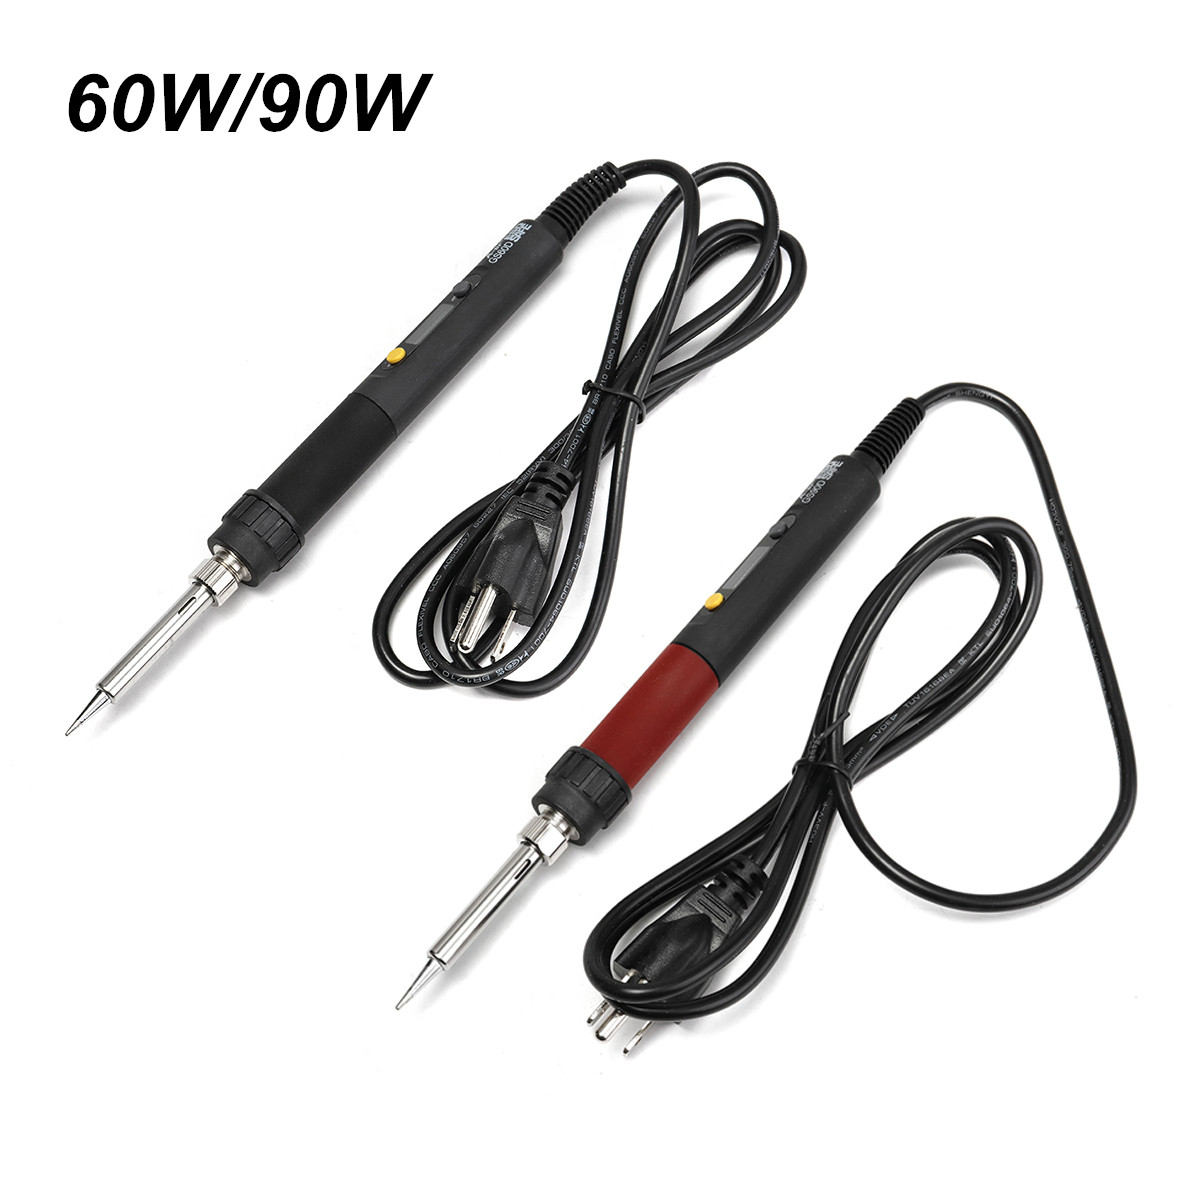 Details about   CXG GS60D/GS90D 60W 90W 110V NC Thermostatic Soldering Iron Electronic Welding